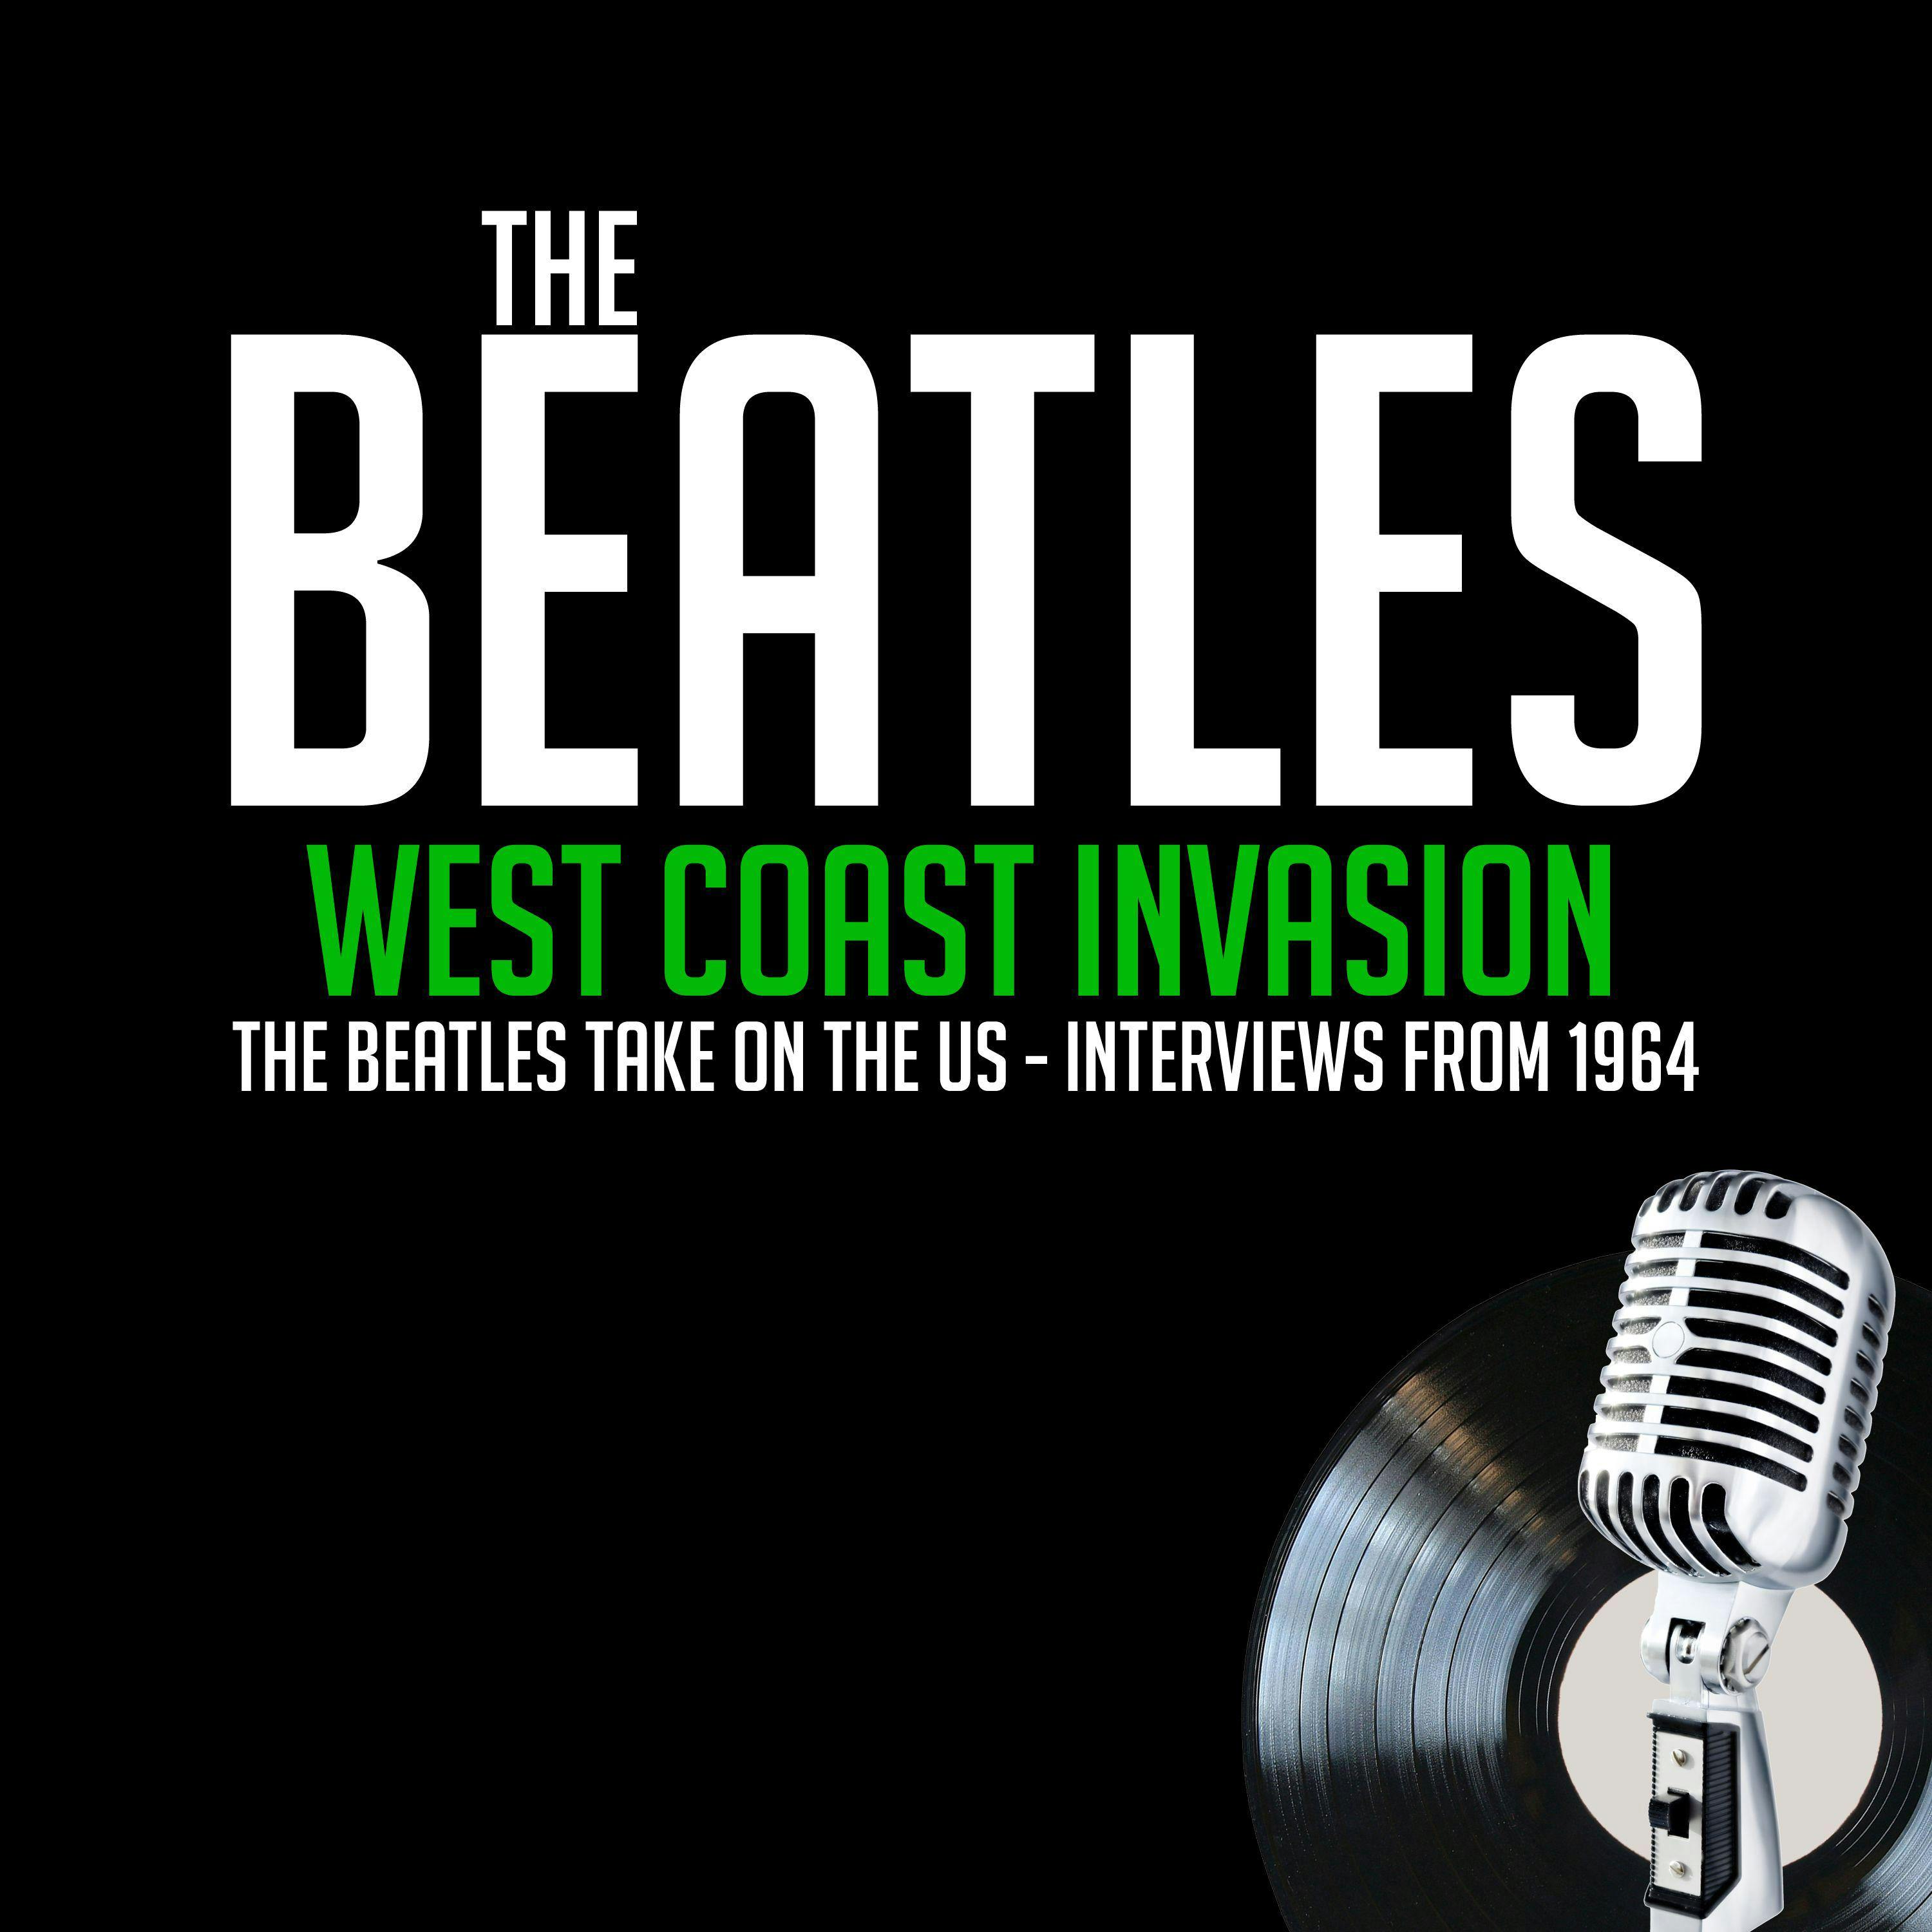 West Coast Invasion: The Beatles Take on the US - Interviews from 1964 - undefined